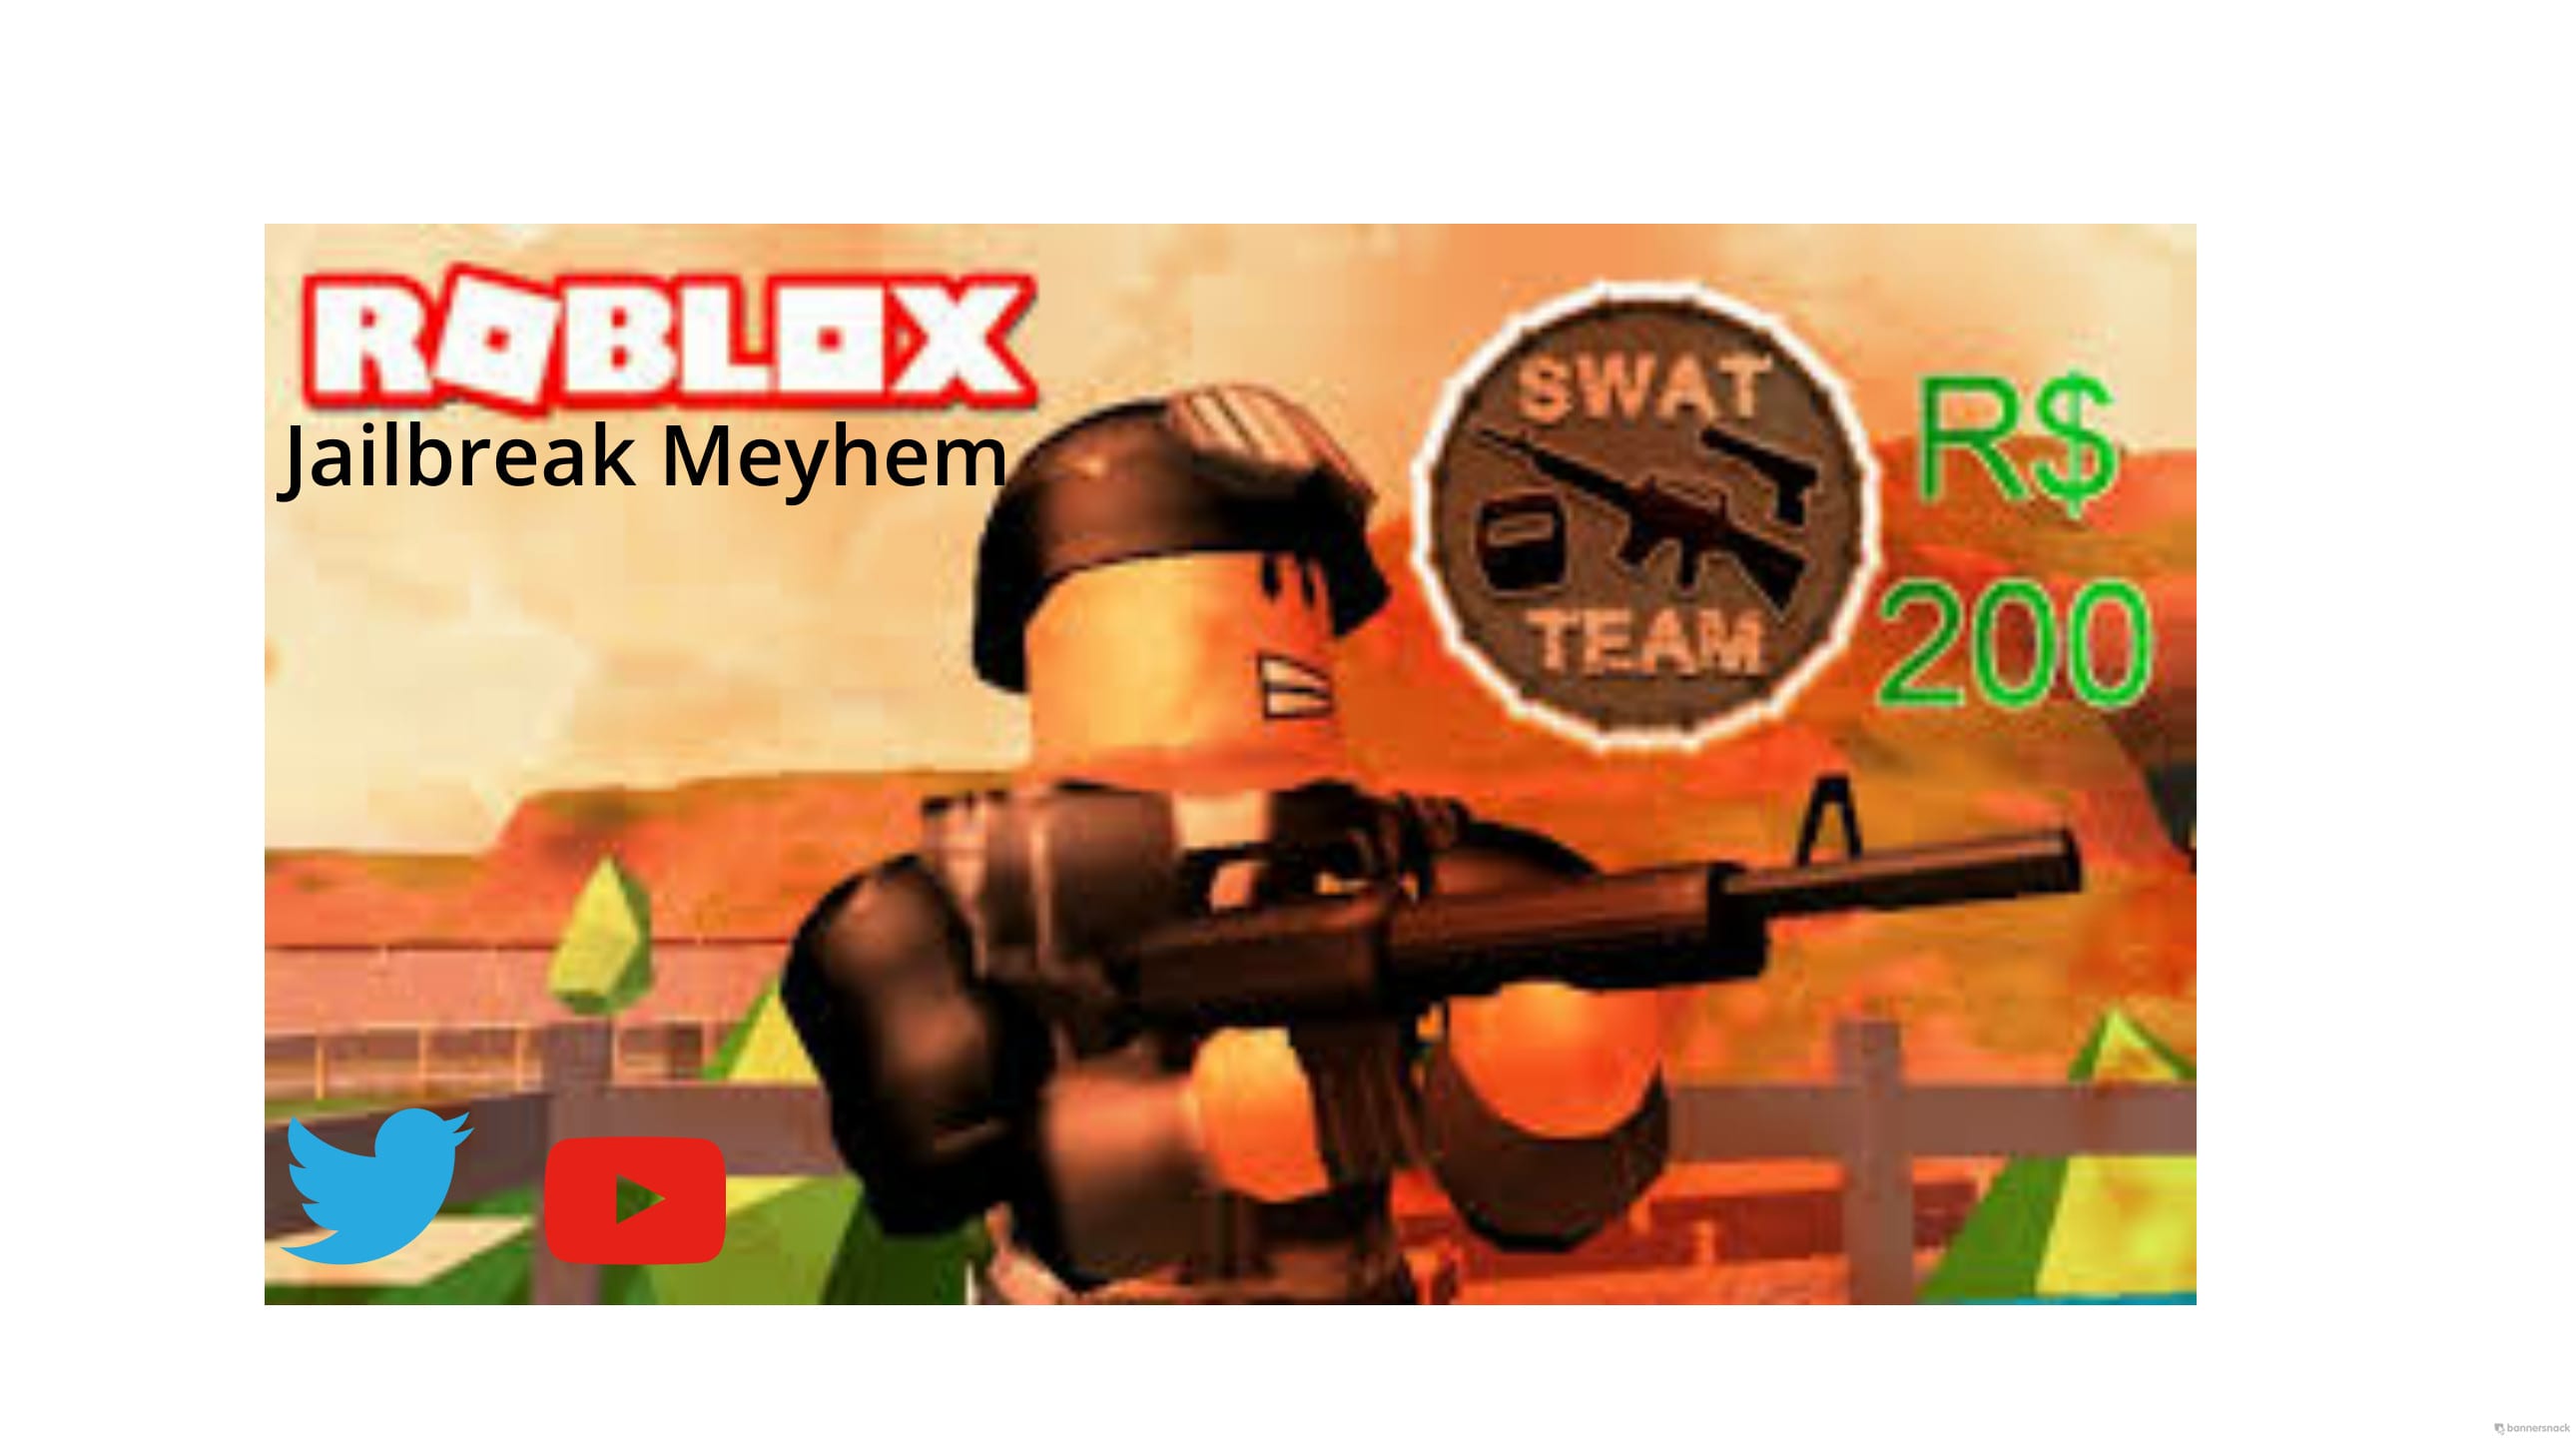 Say Happy Birthday And Shout You Out On Youtube By Jordan49740 - roblox jailbreak sniper rifle